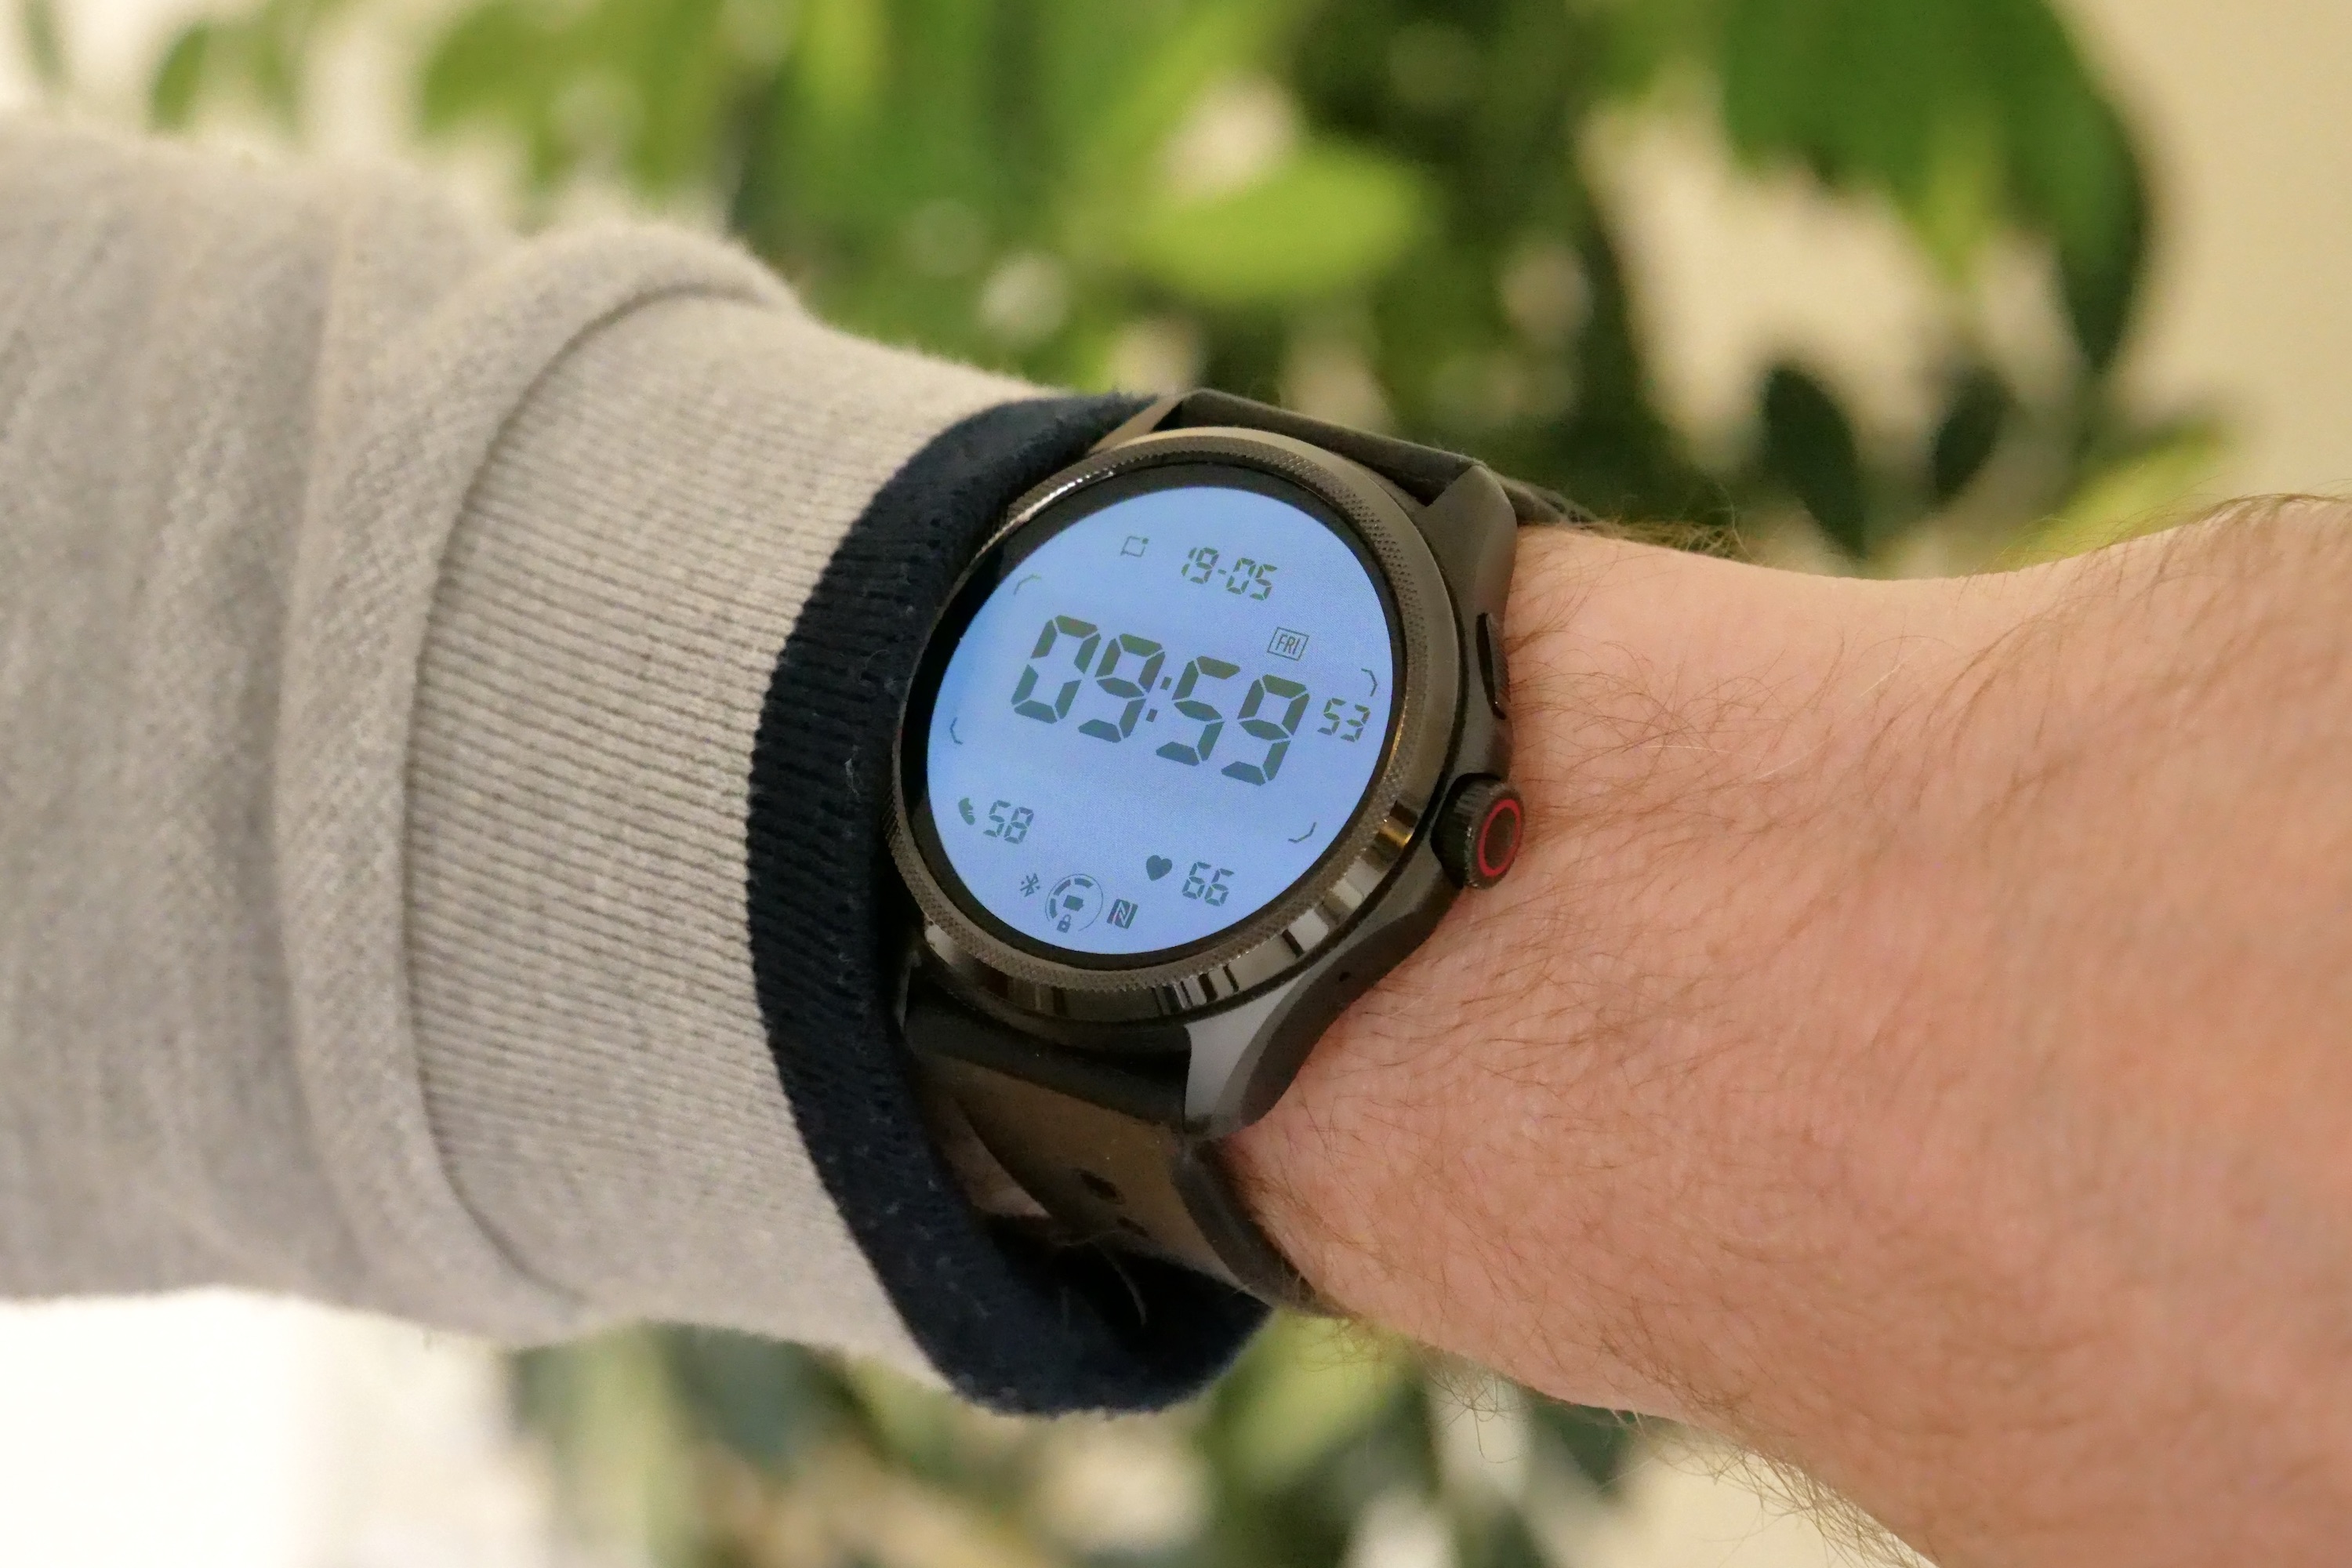 Mobvoi Ticwatch Pro 5 review: Is this the best Wear OS smartwatch yet?